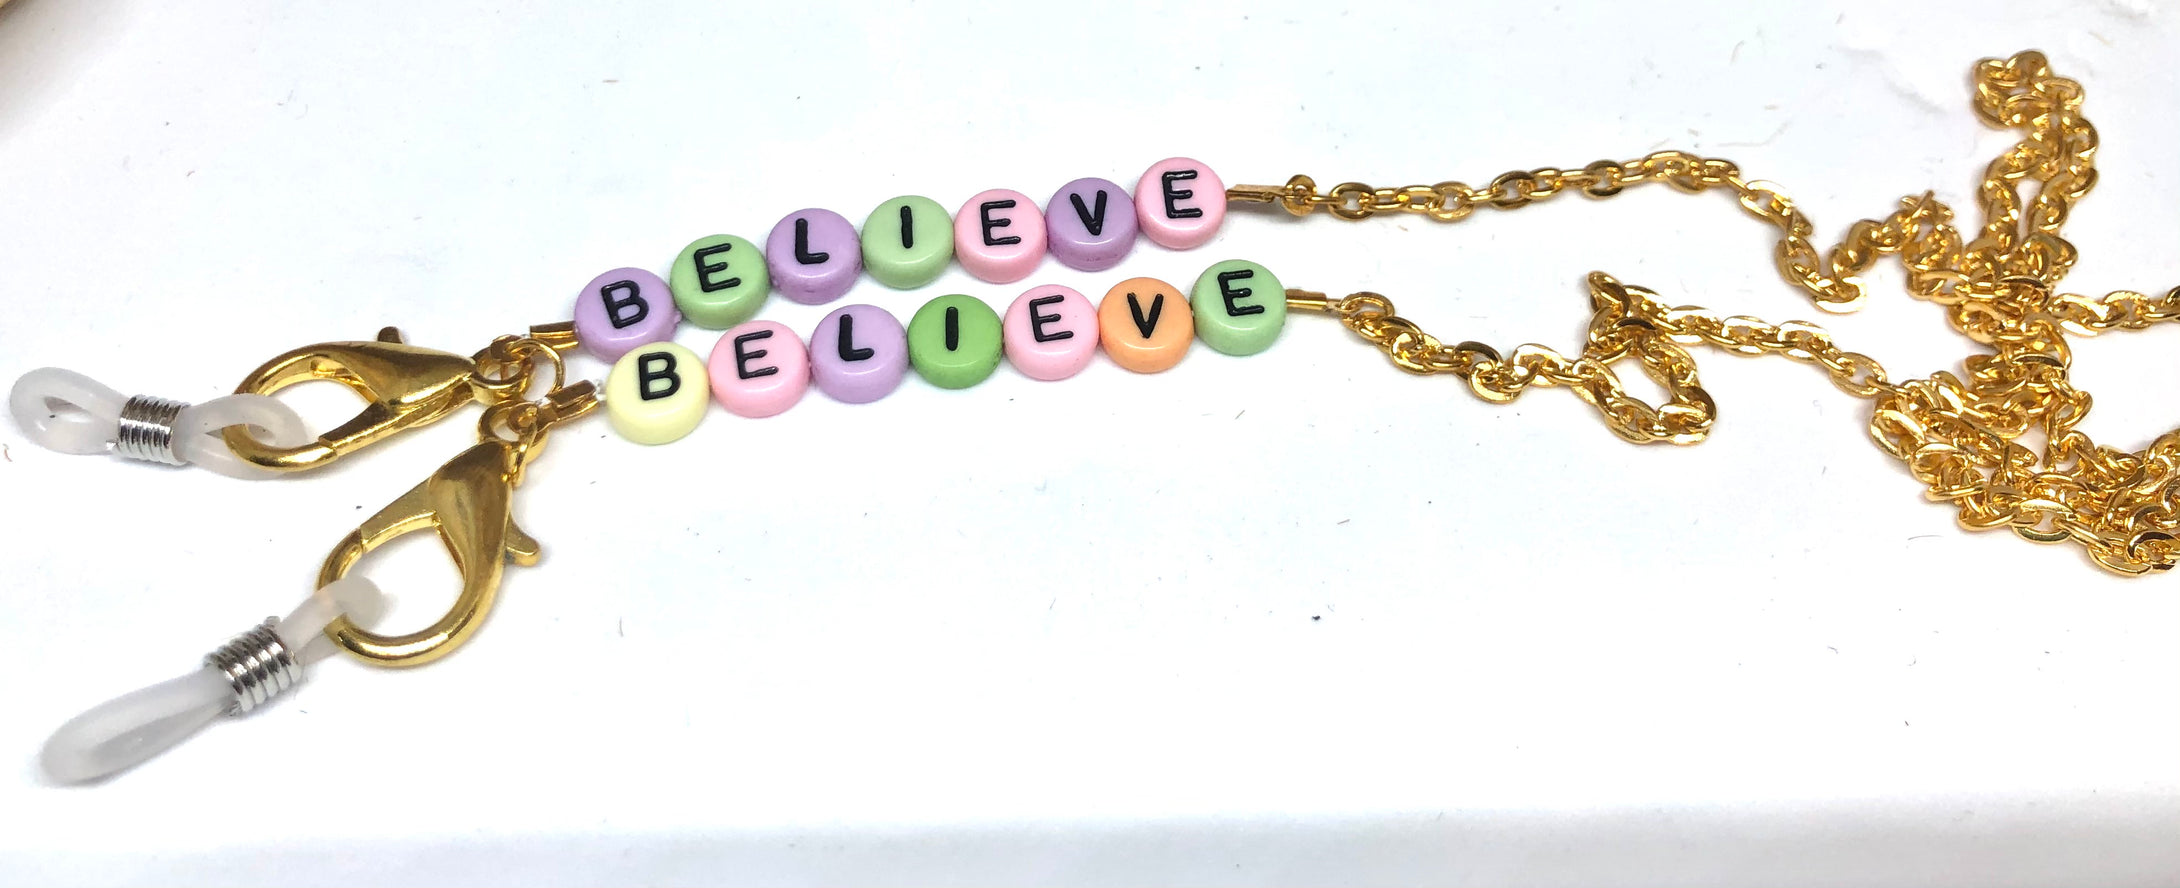 Believe Face Mask Chain